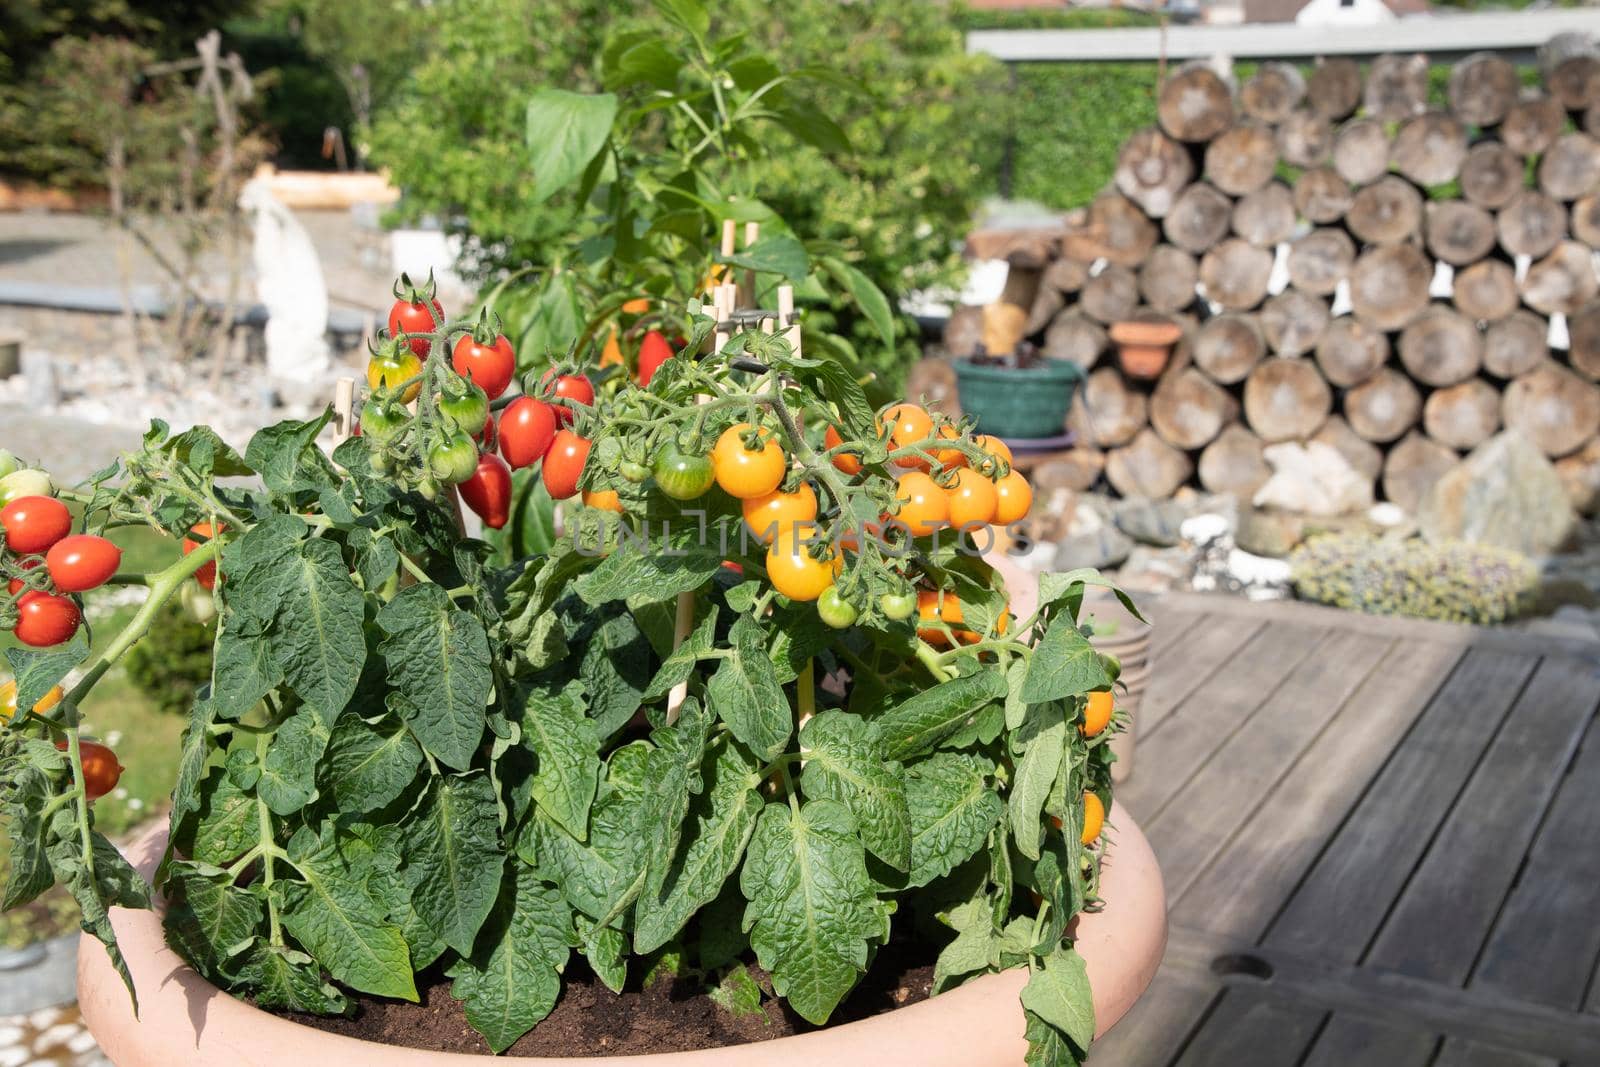 Large pots with red and yellow cherry tomatoes on the garden terrace,planting by KaterinaDalemans